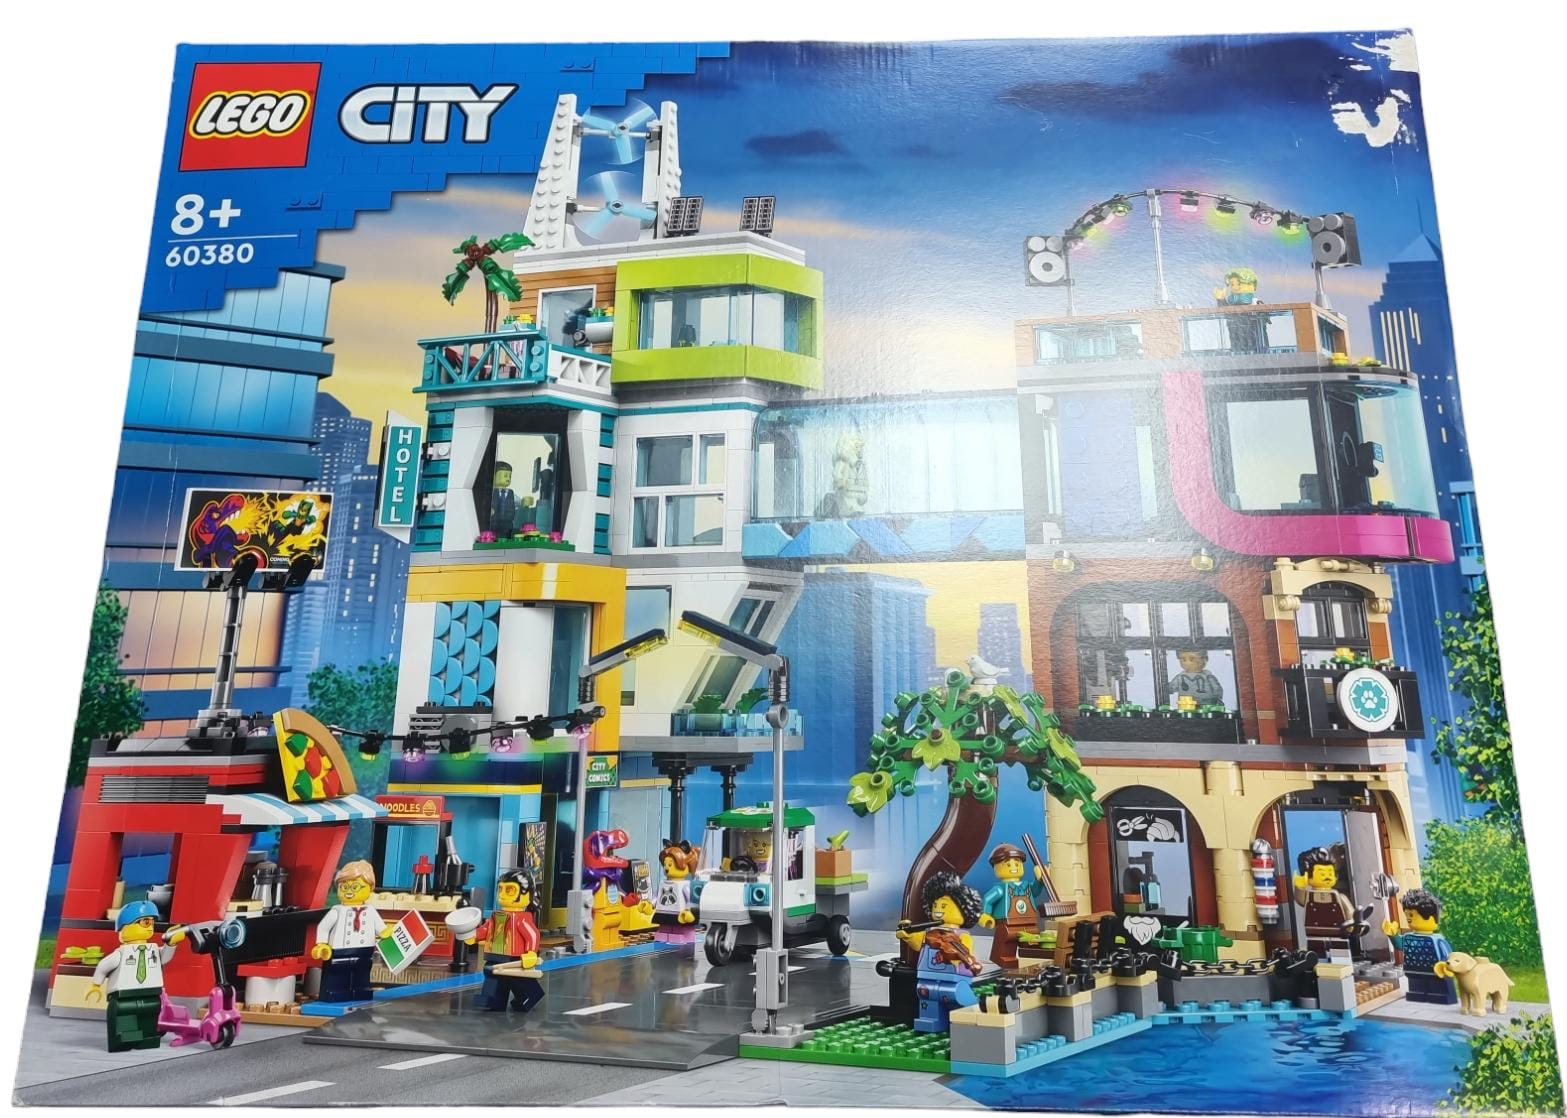 LEGO City 60380 Downtown City Centre Reconfigurable Modular Building Playset - NEW & SEALED